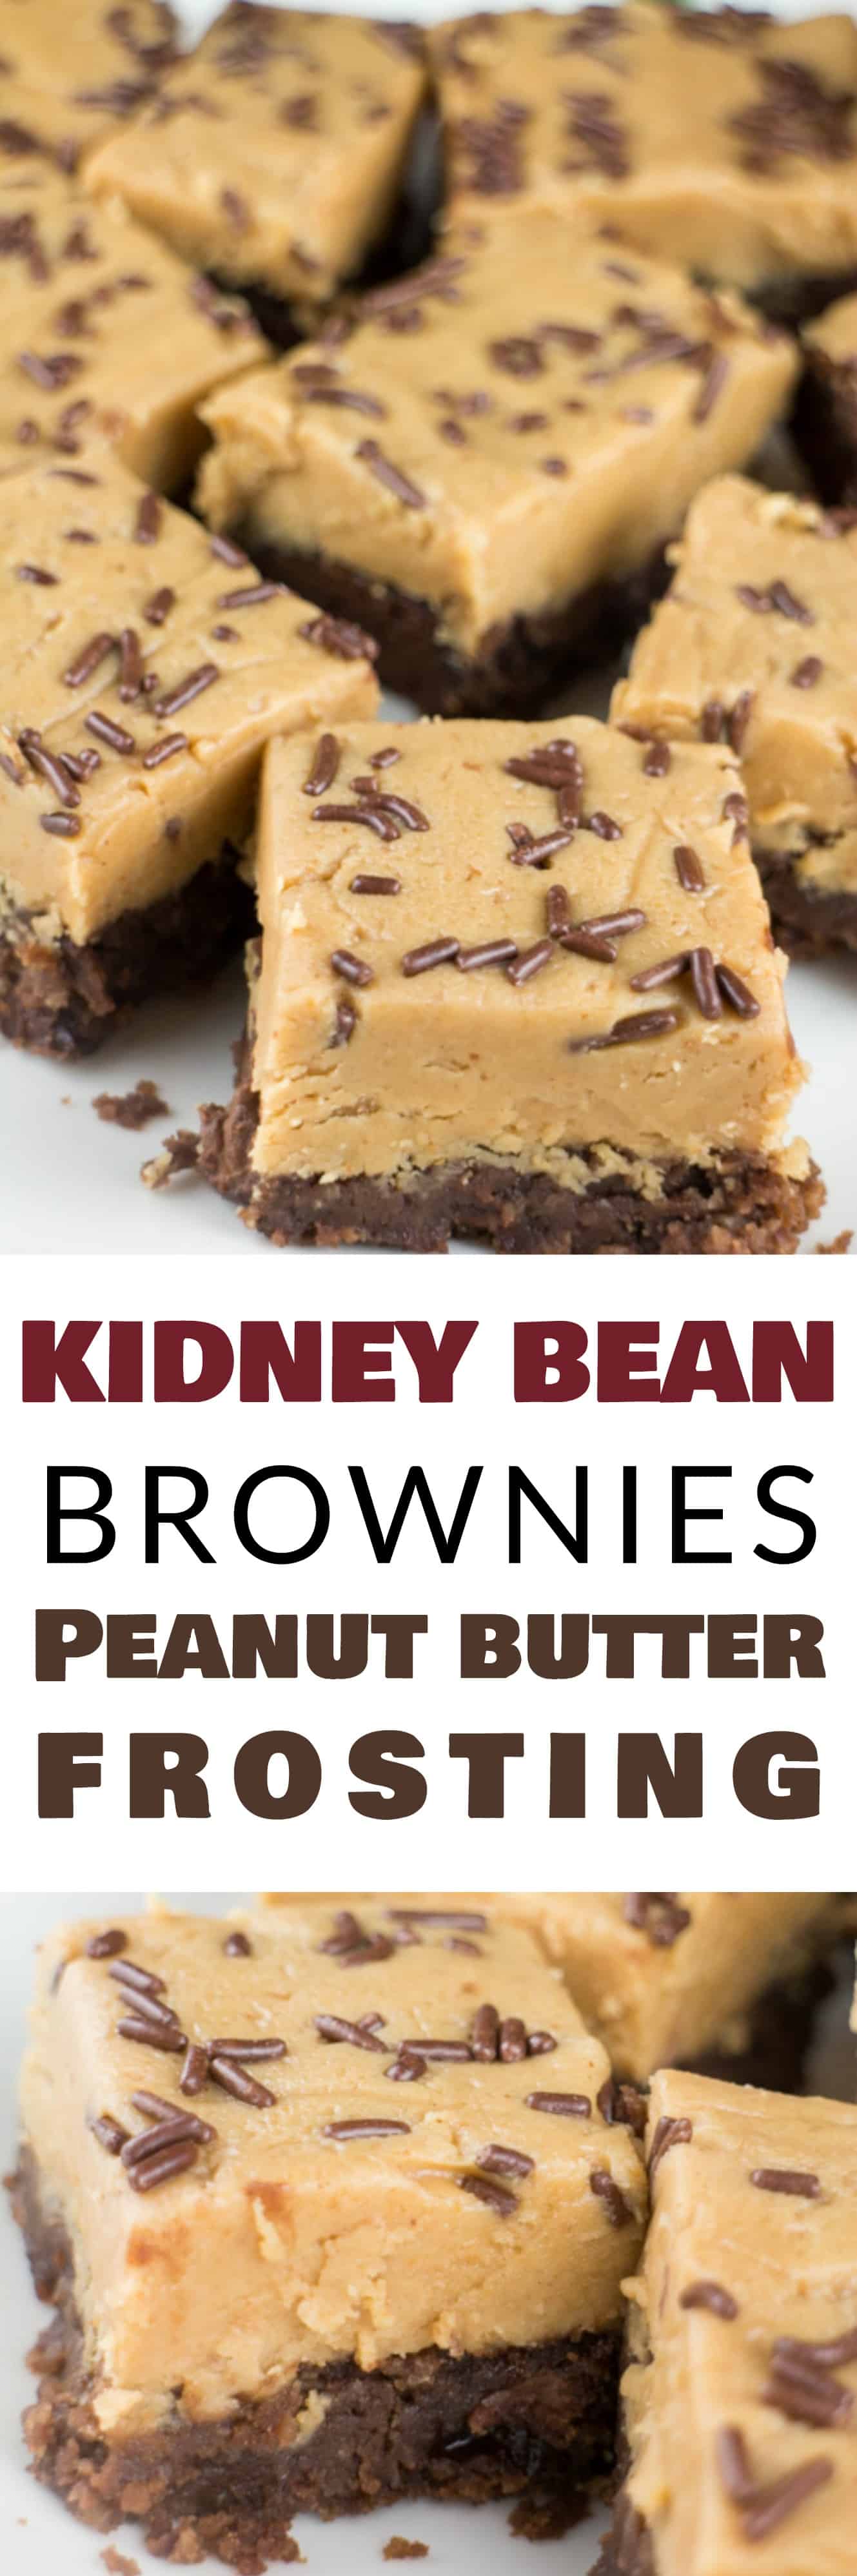 DELICIOUS CHOCOLATE Brownies made with KIDNEY BEANS! This healthy easy recipe makes brownies with kidney beans instead of butter and oil! They are topped with the BEST peanut butter frosting! Easy to make them completely gluten free and vegan too!